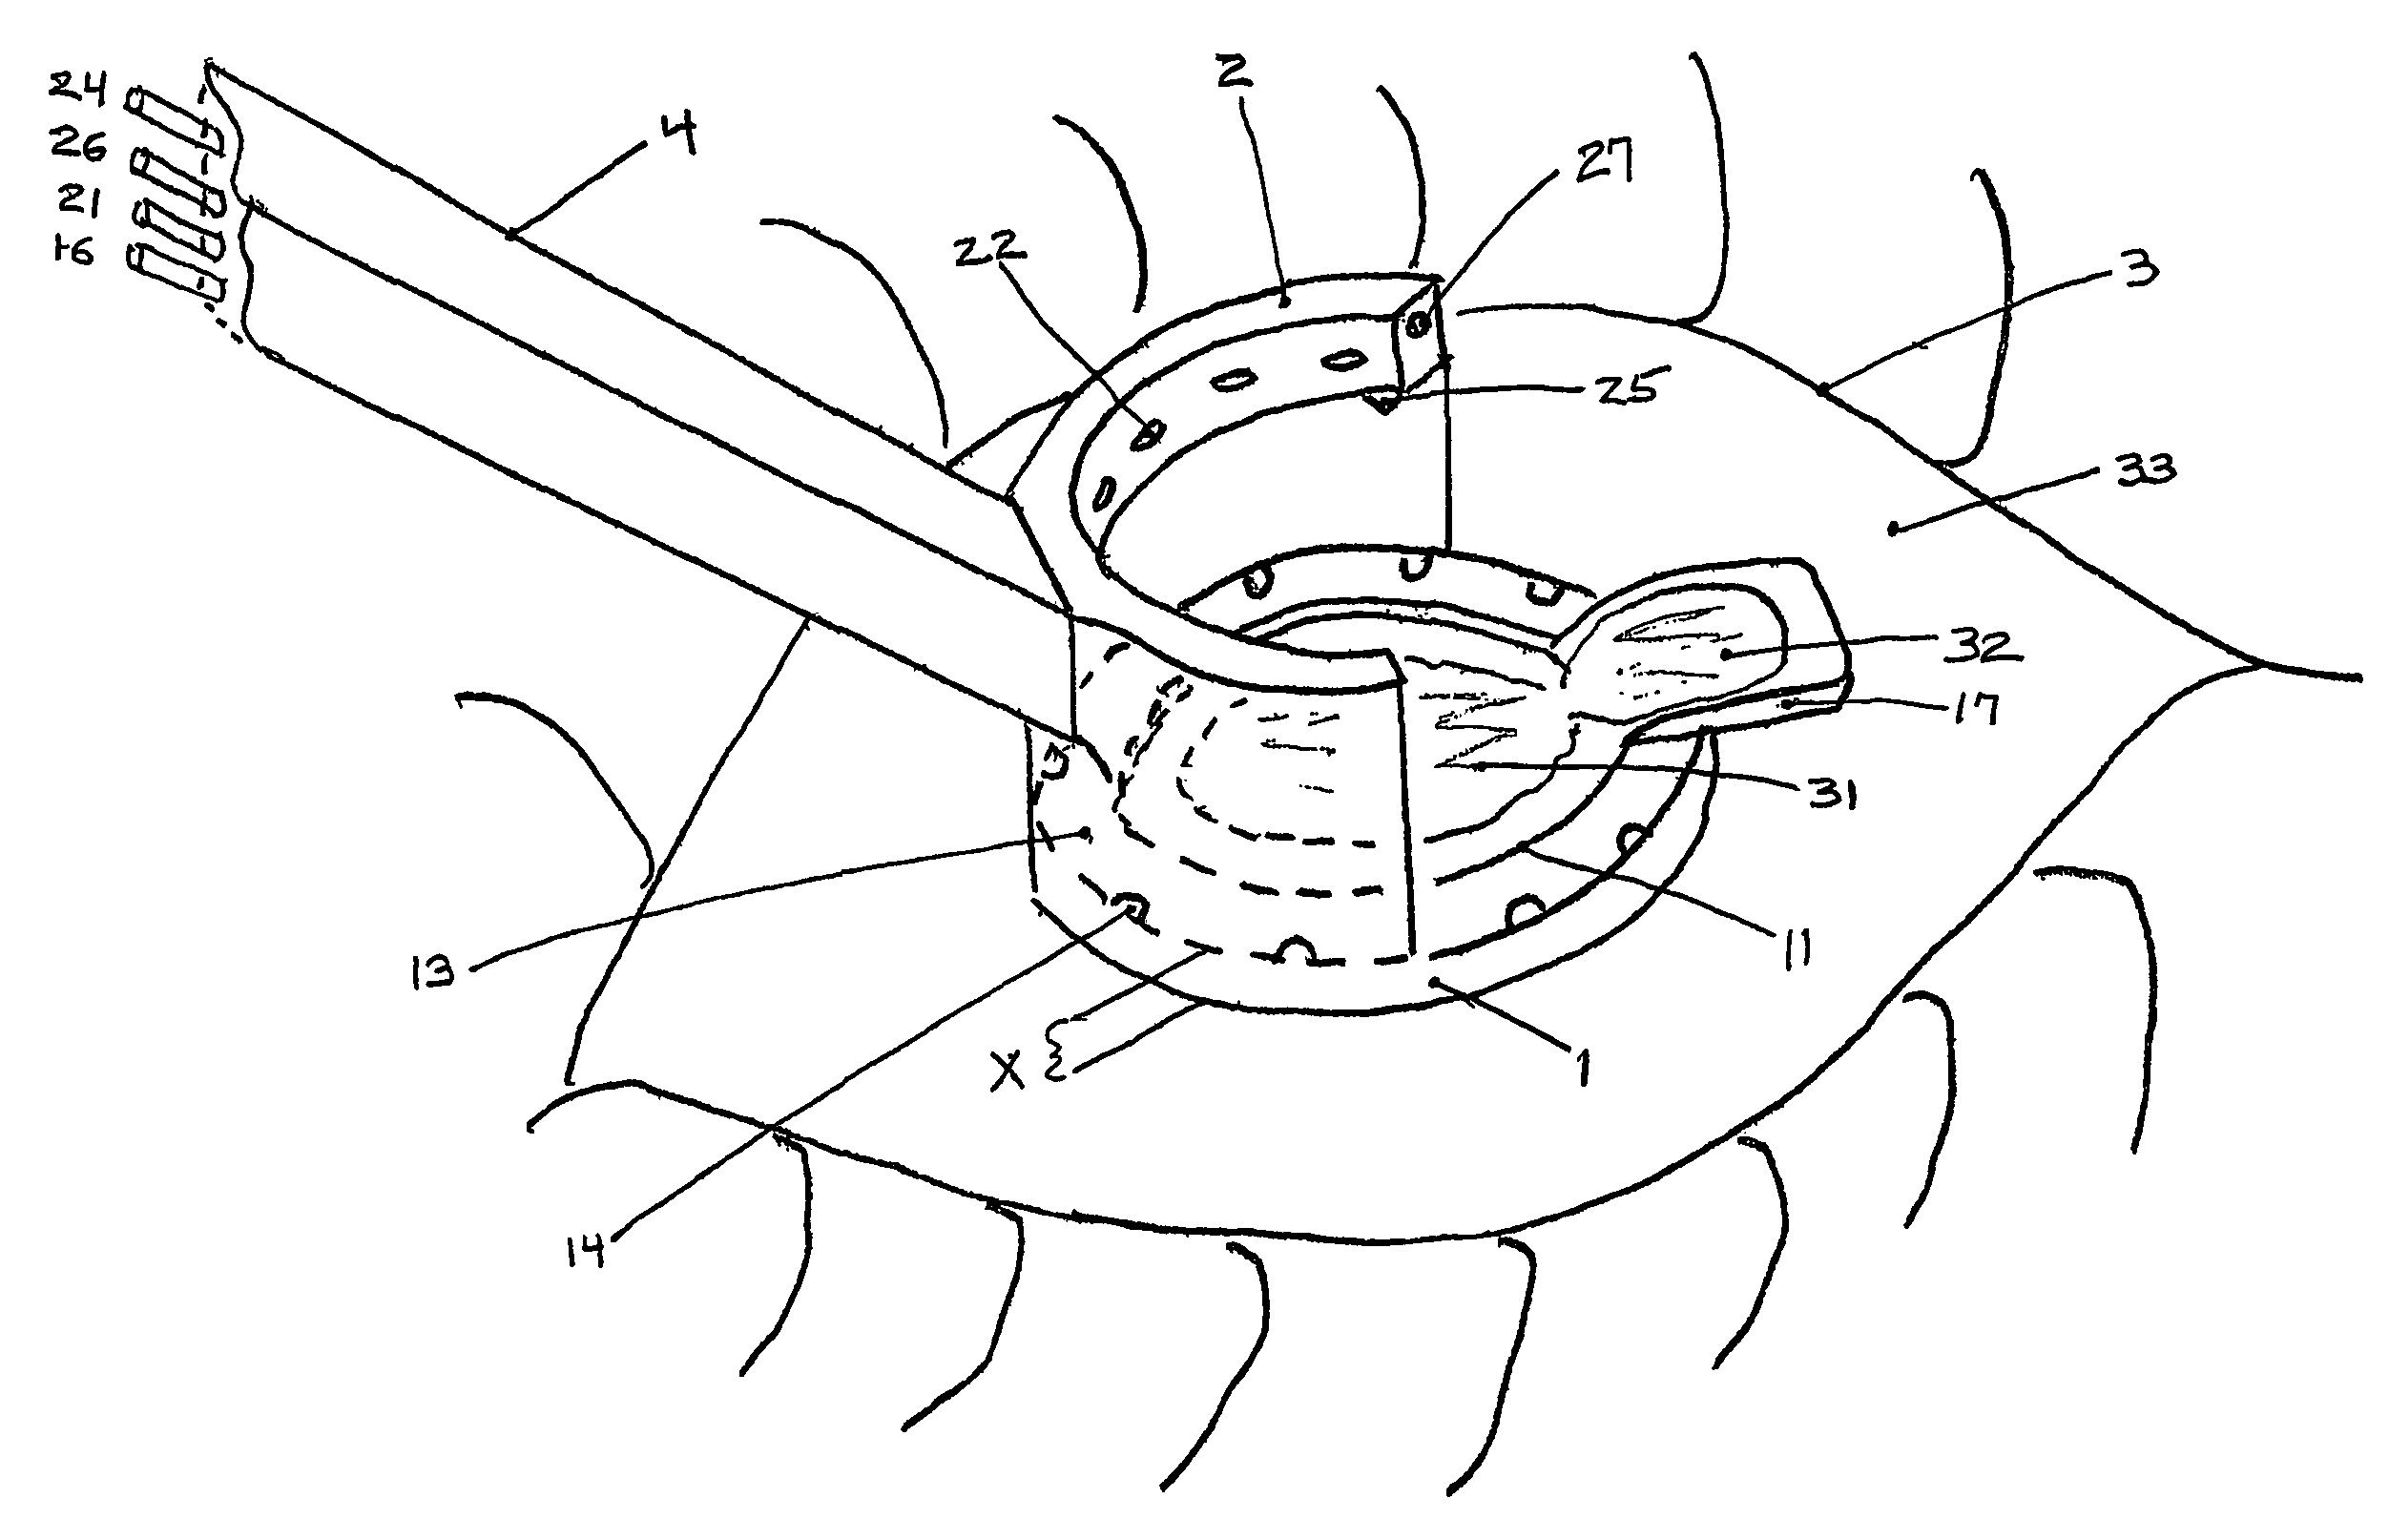 Multi-function surgical instrument for facilitating ophthalmic laser surgery